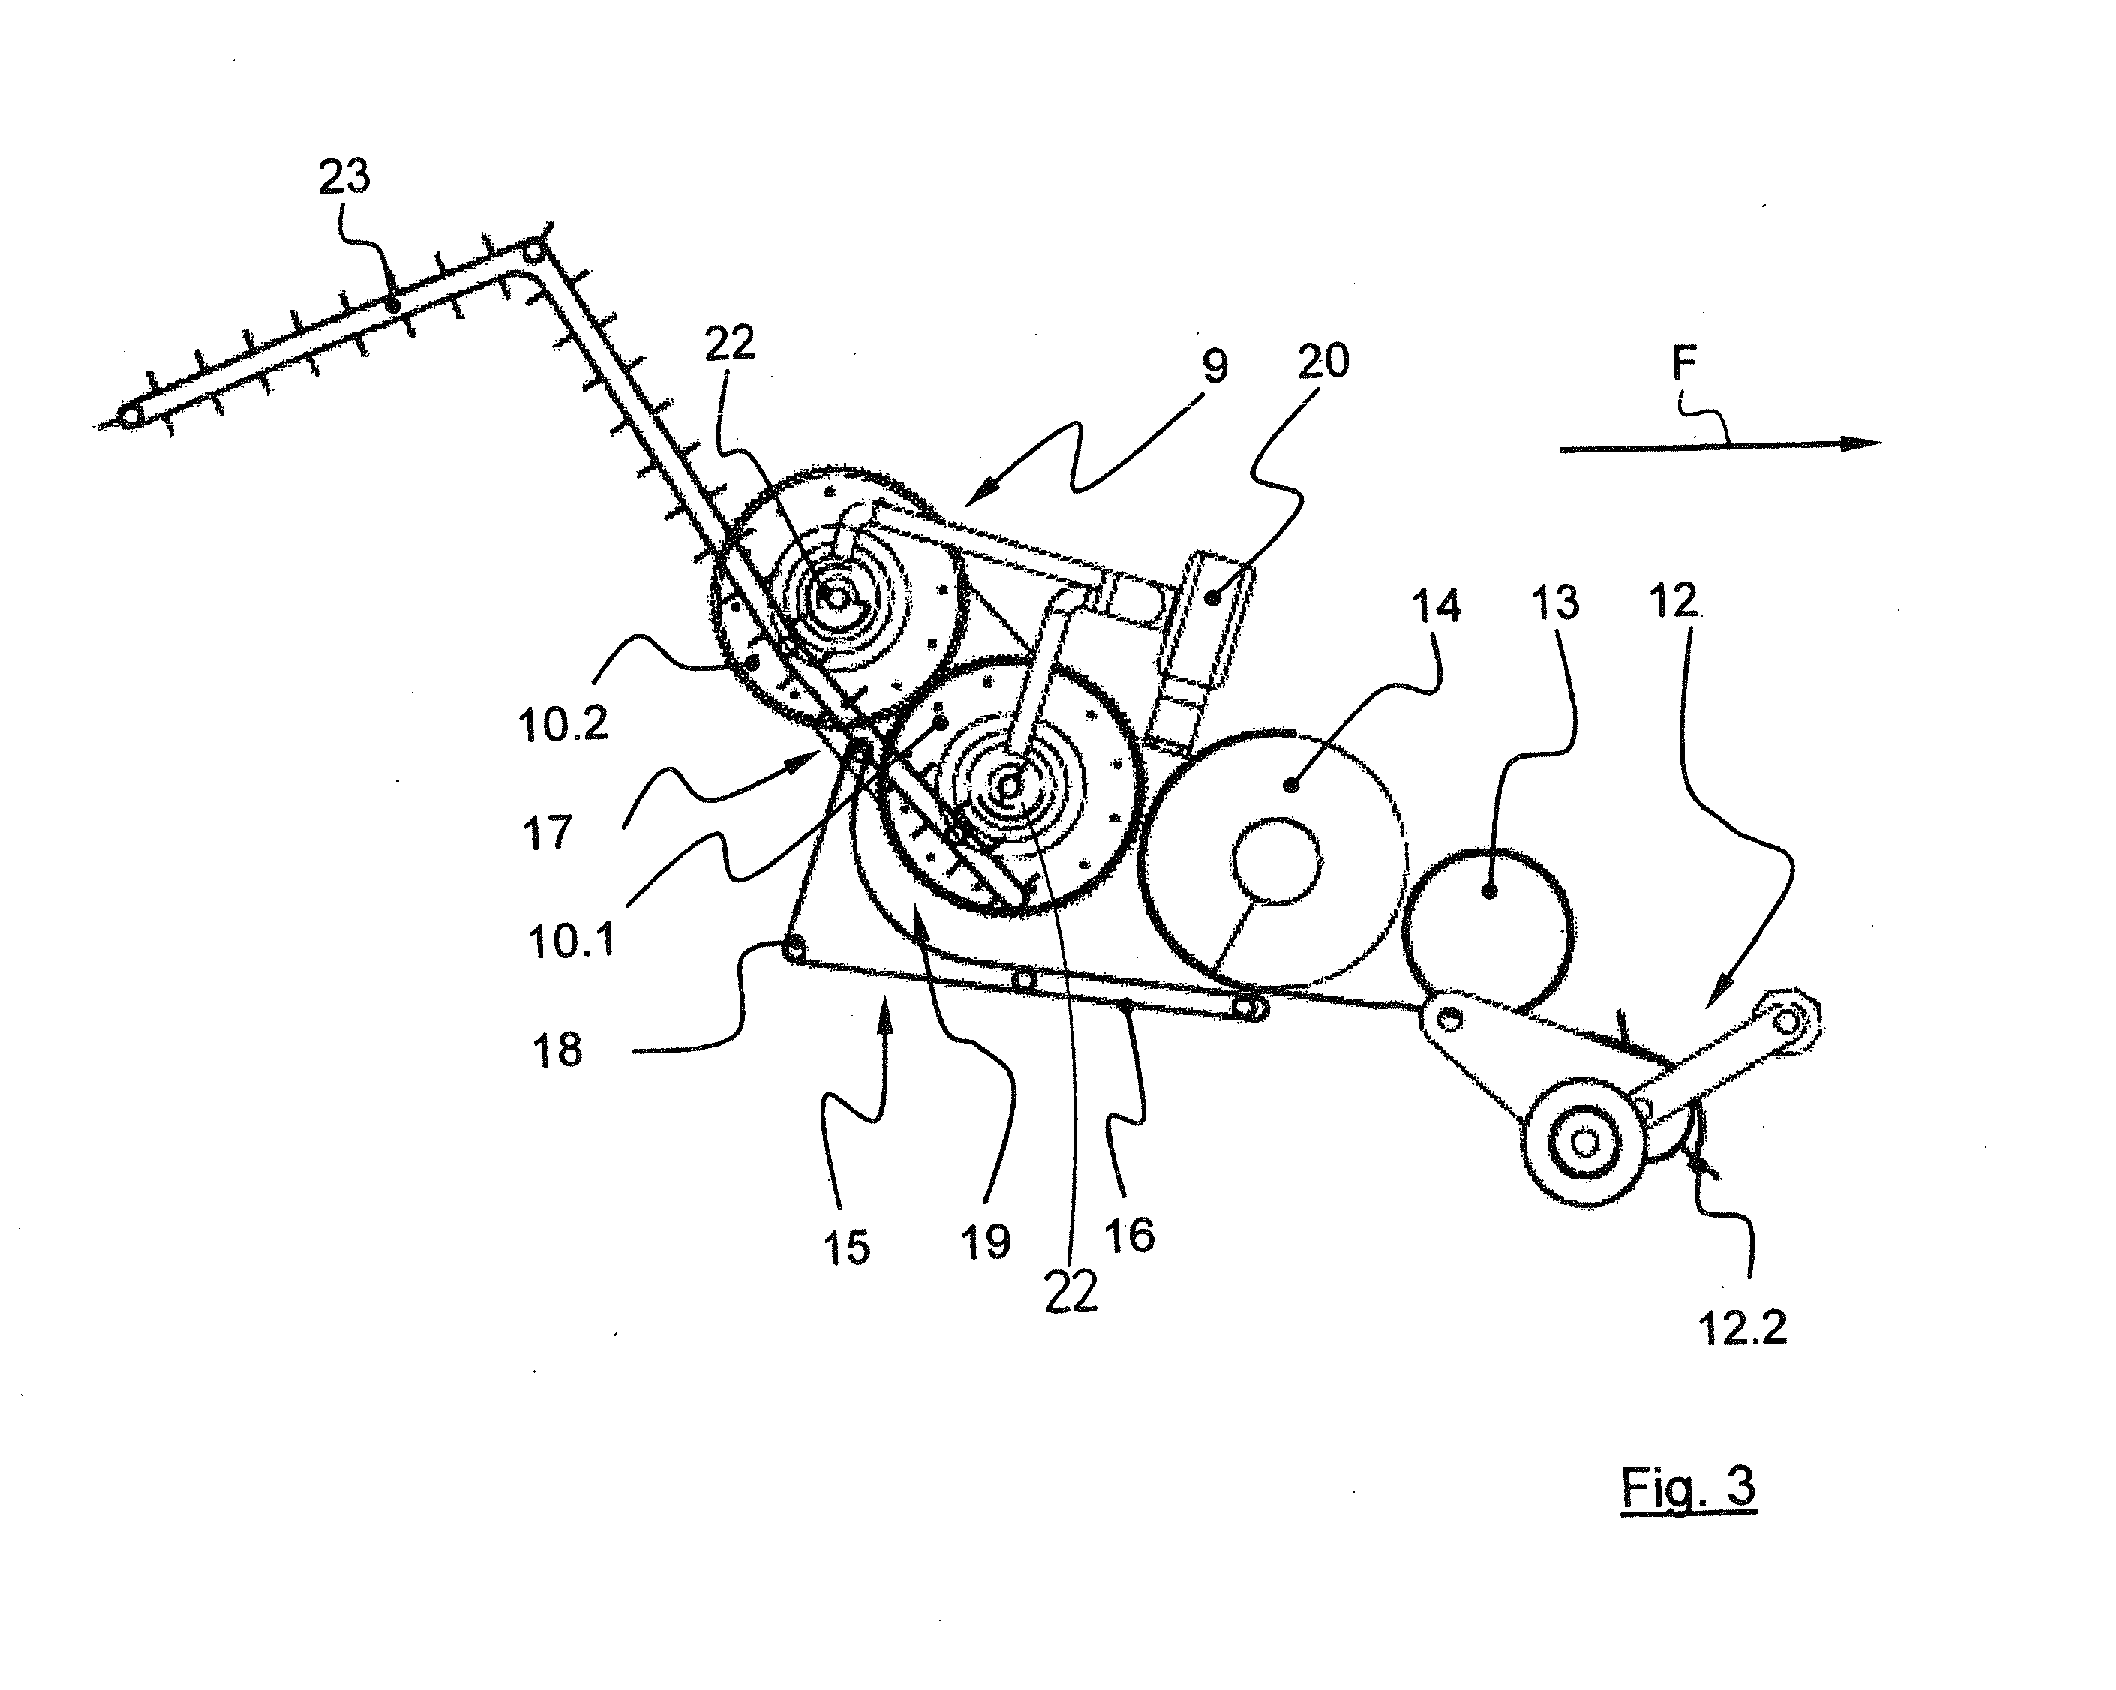 Apparatus for compacting fibrous plant material, especially for compacting stalk material